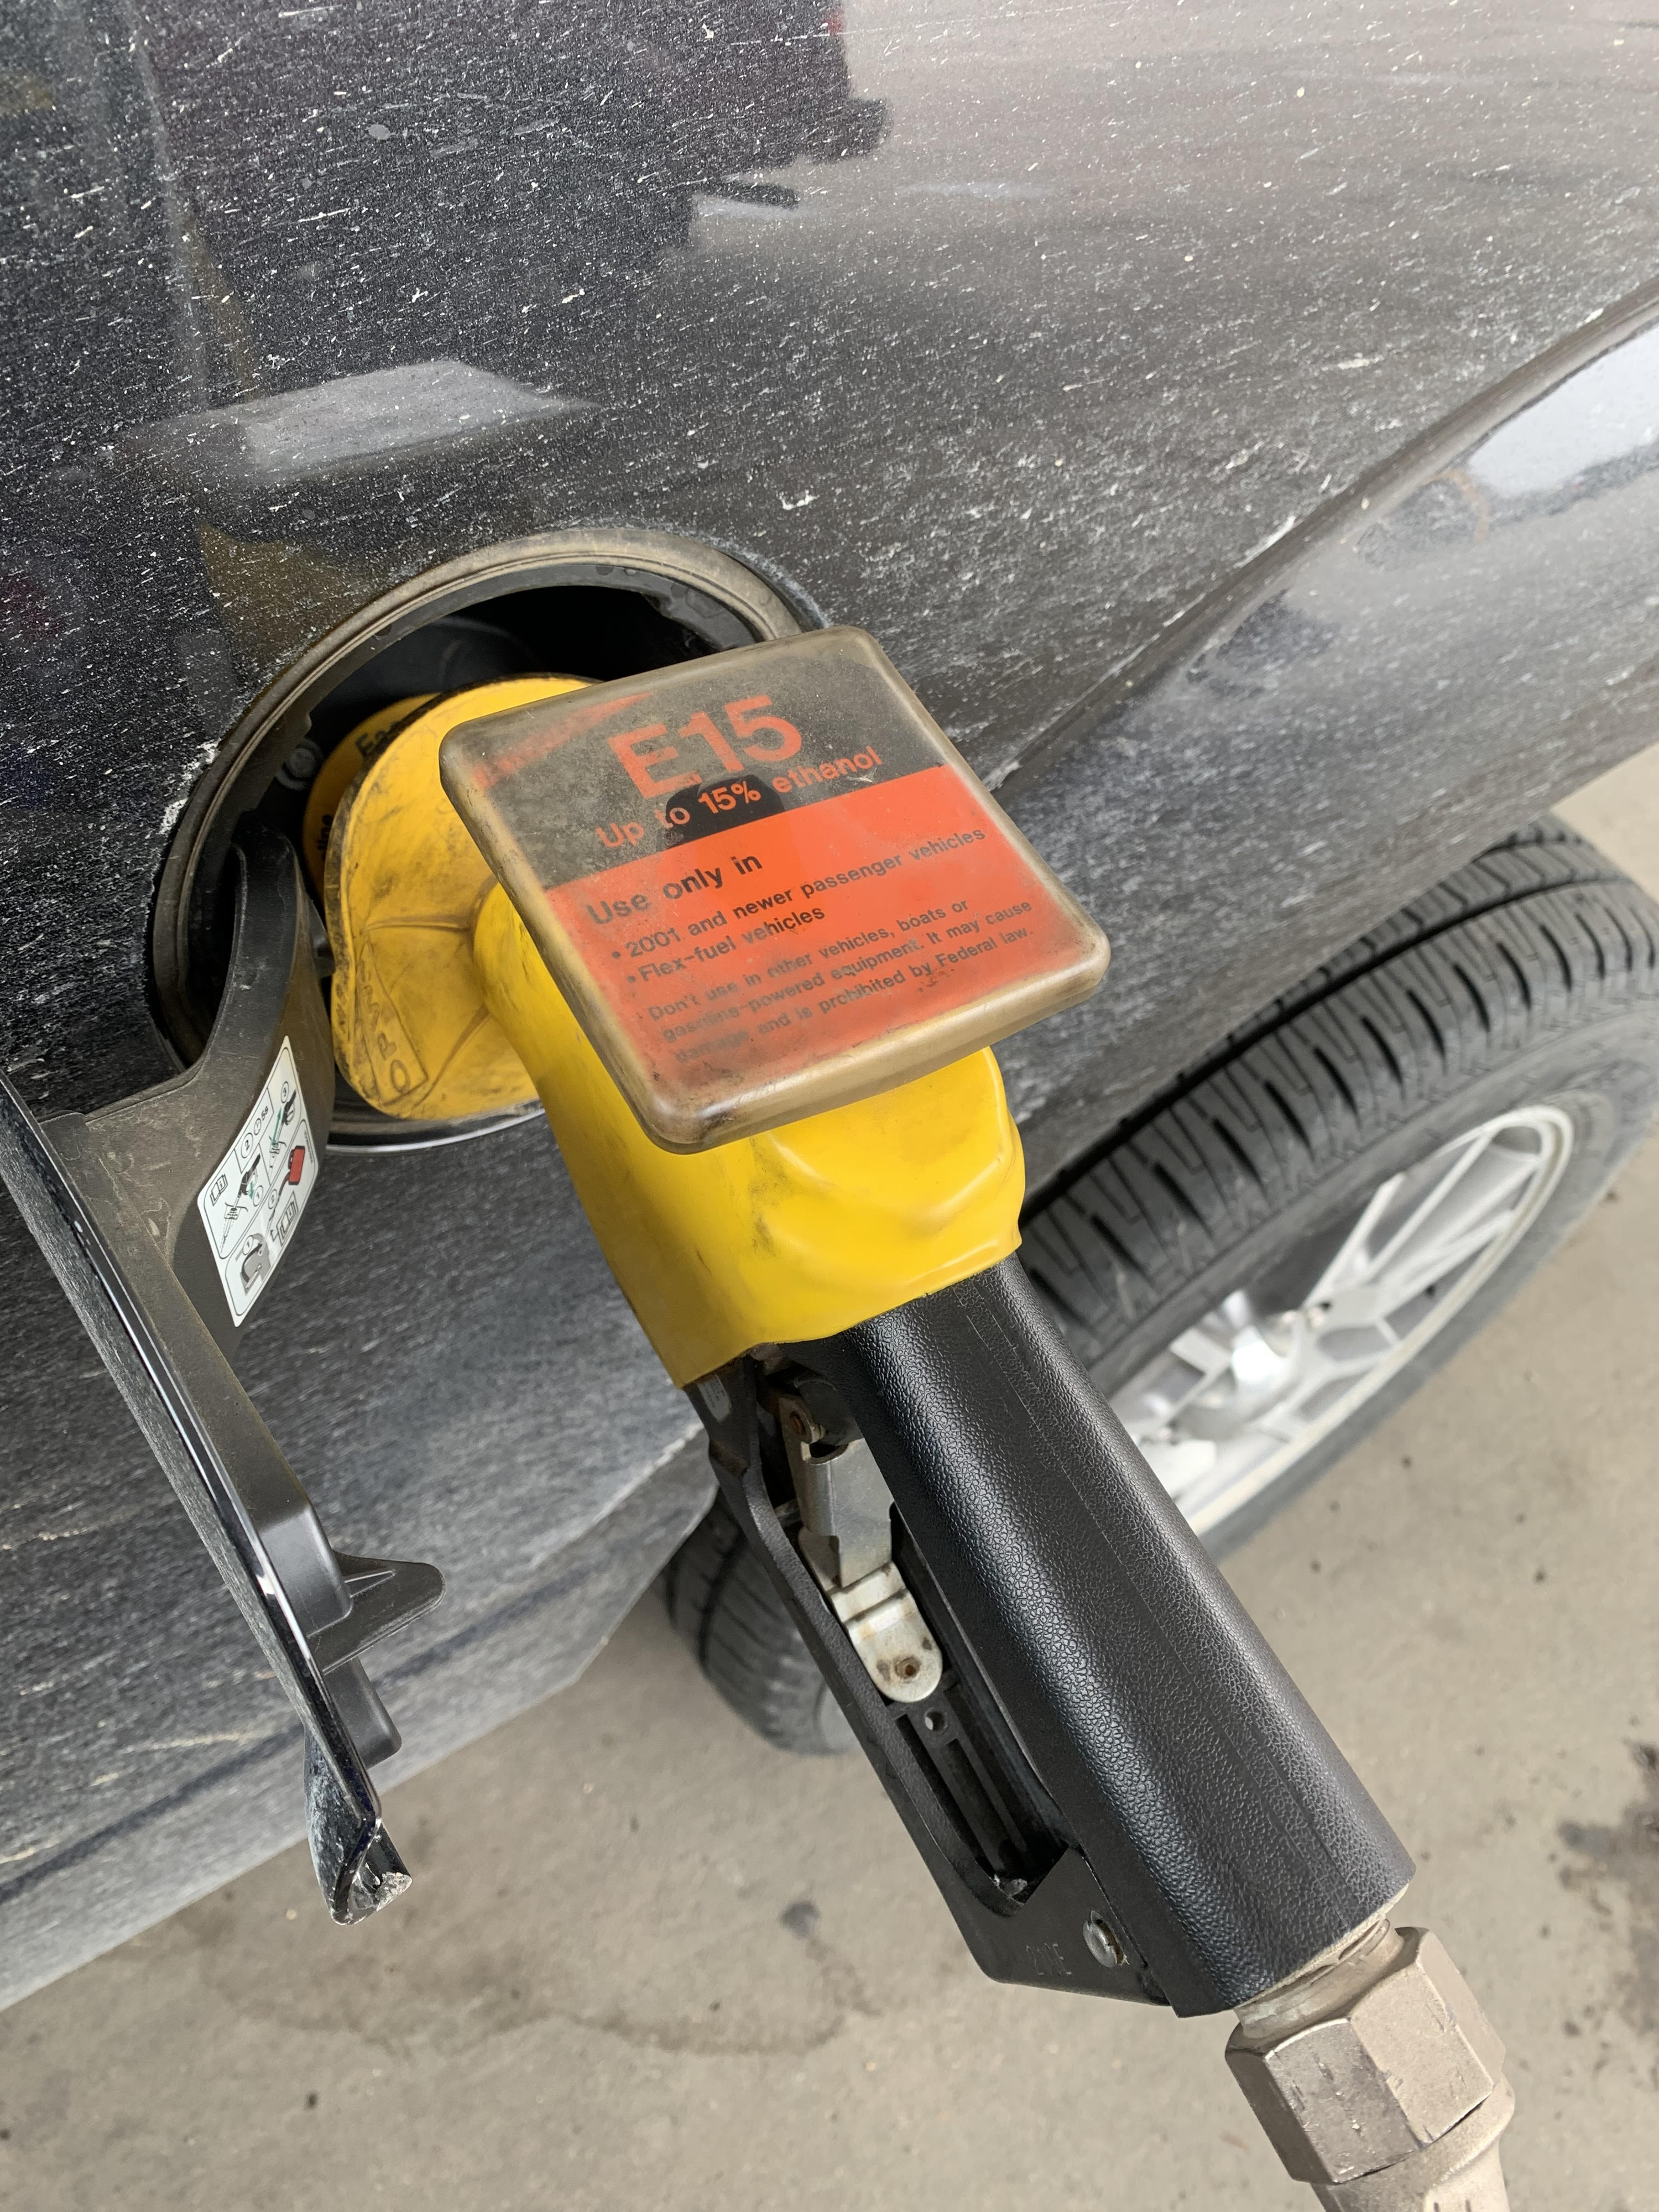 Mid-morning Ag News, February 9, 2022: Gas prices continue to climb higher